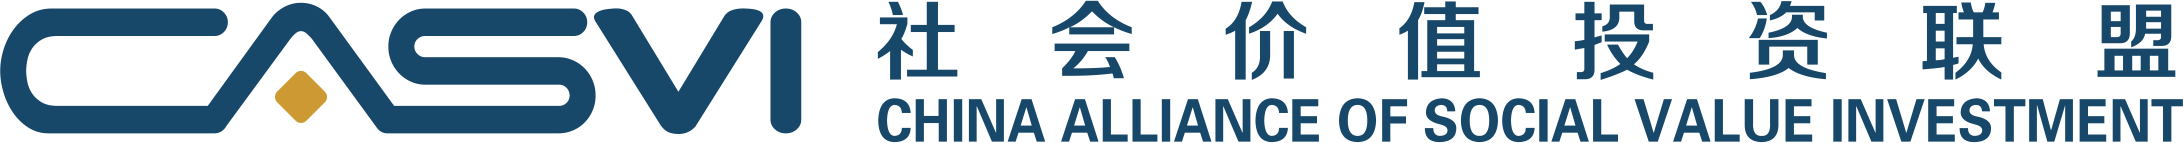 China Alliance of Social Value Investment (CASVI)